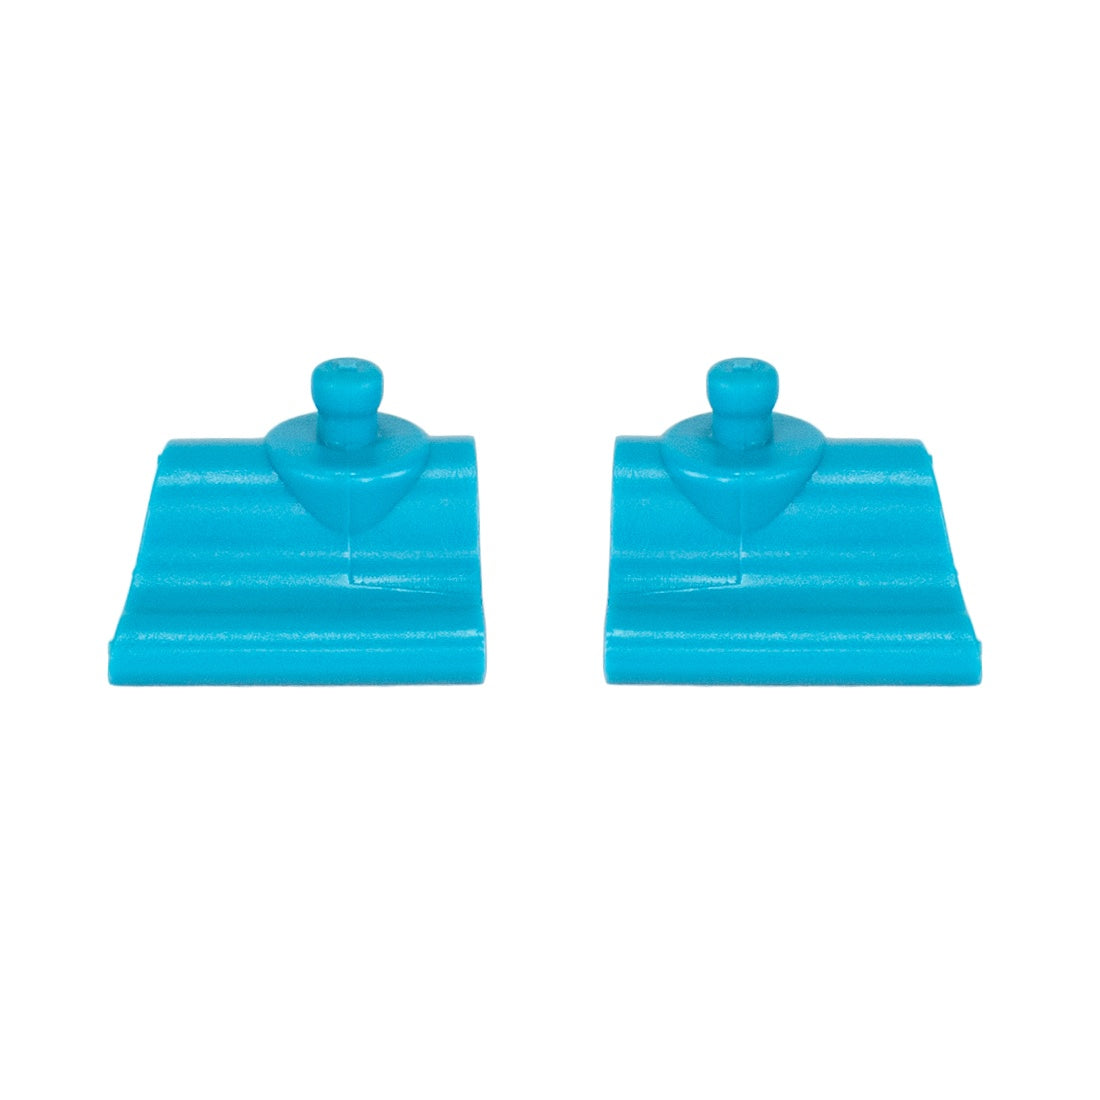 Moerman F*LIQ Clips - Set of Two - Side by Side Top View